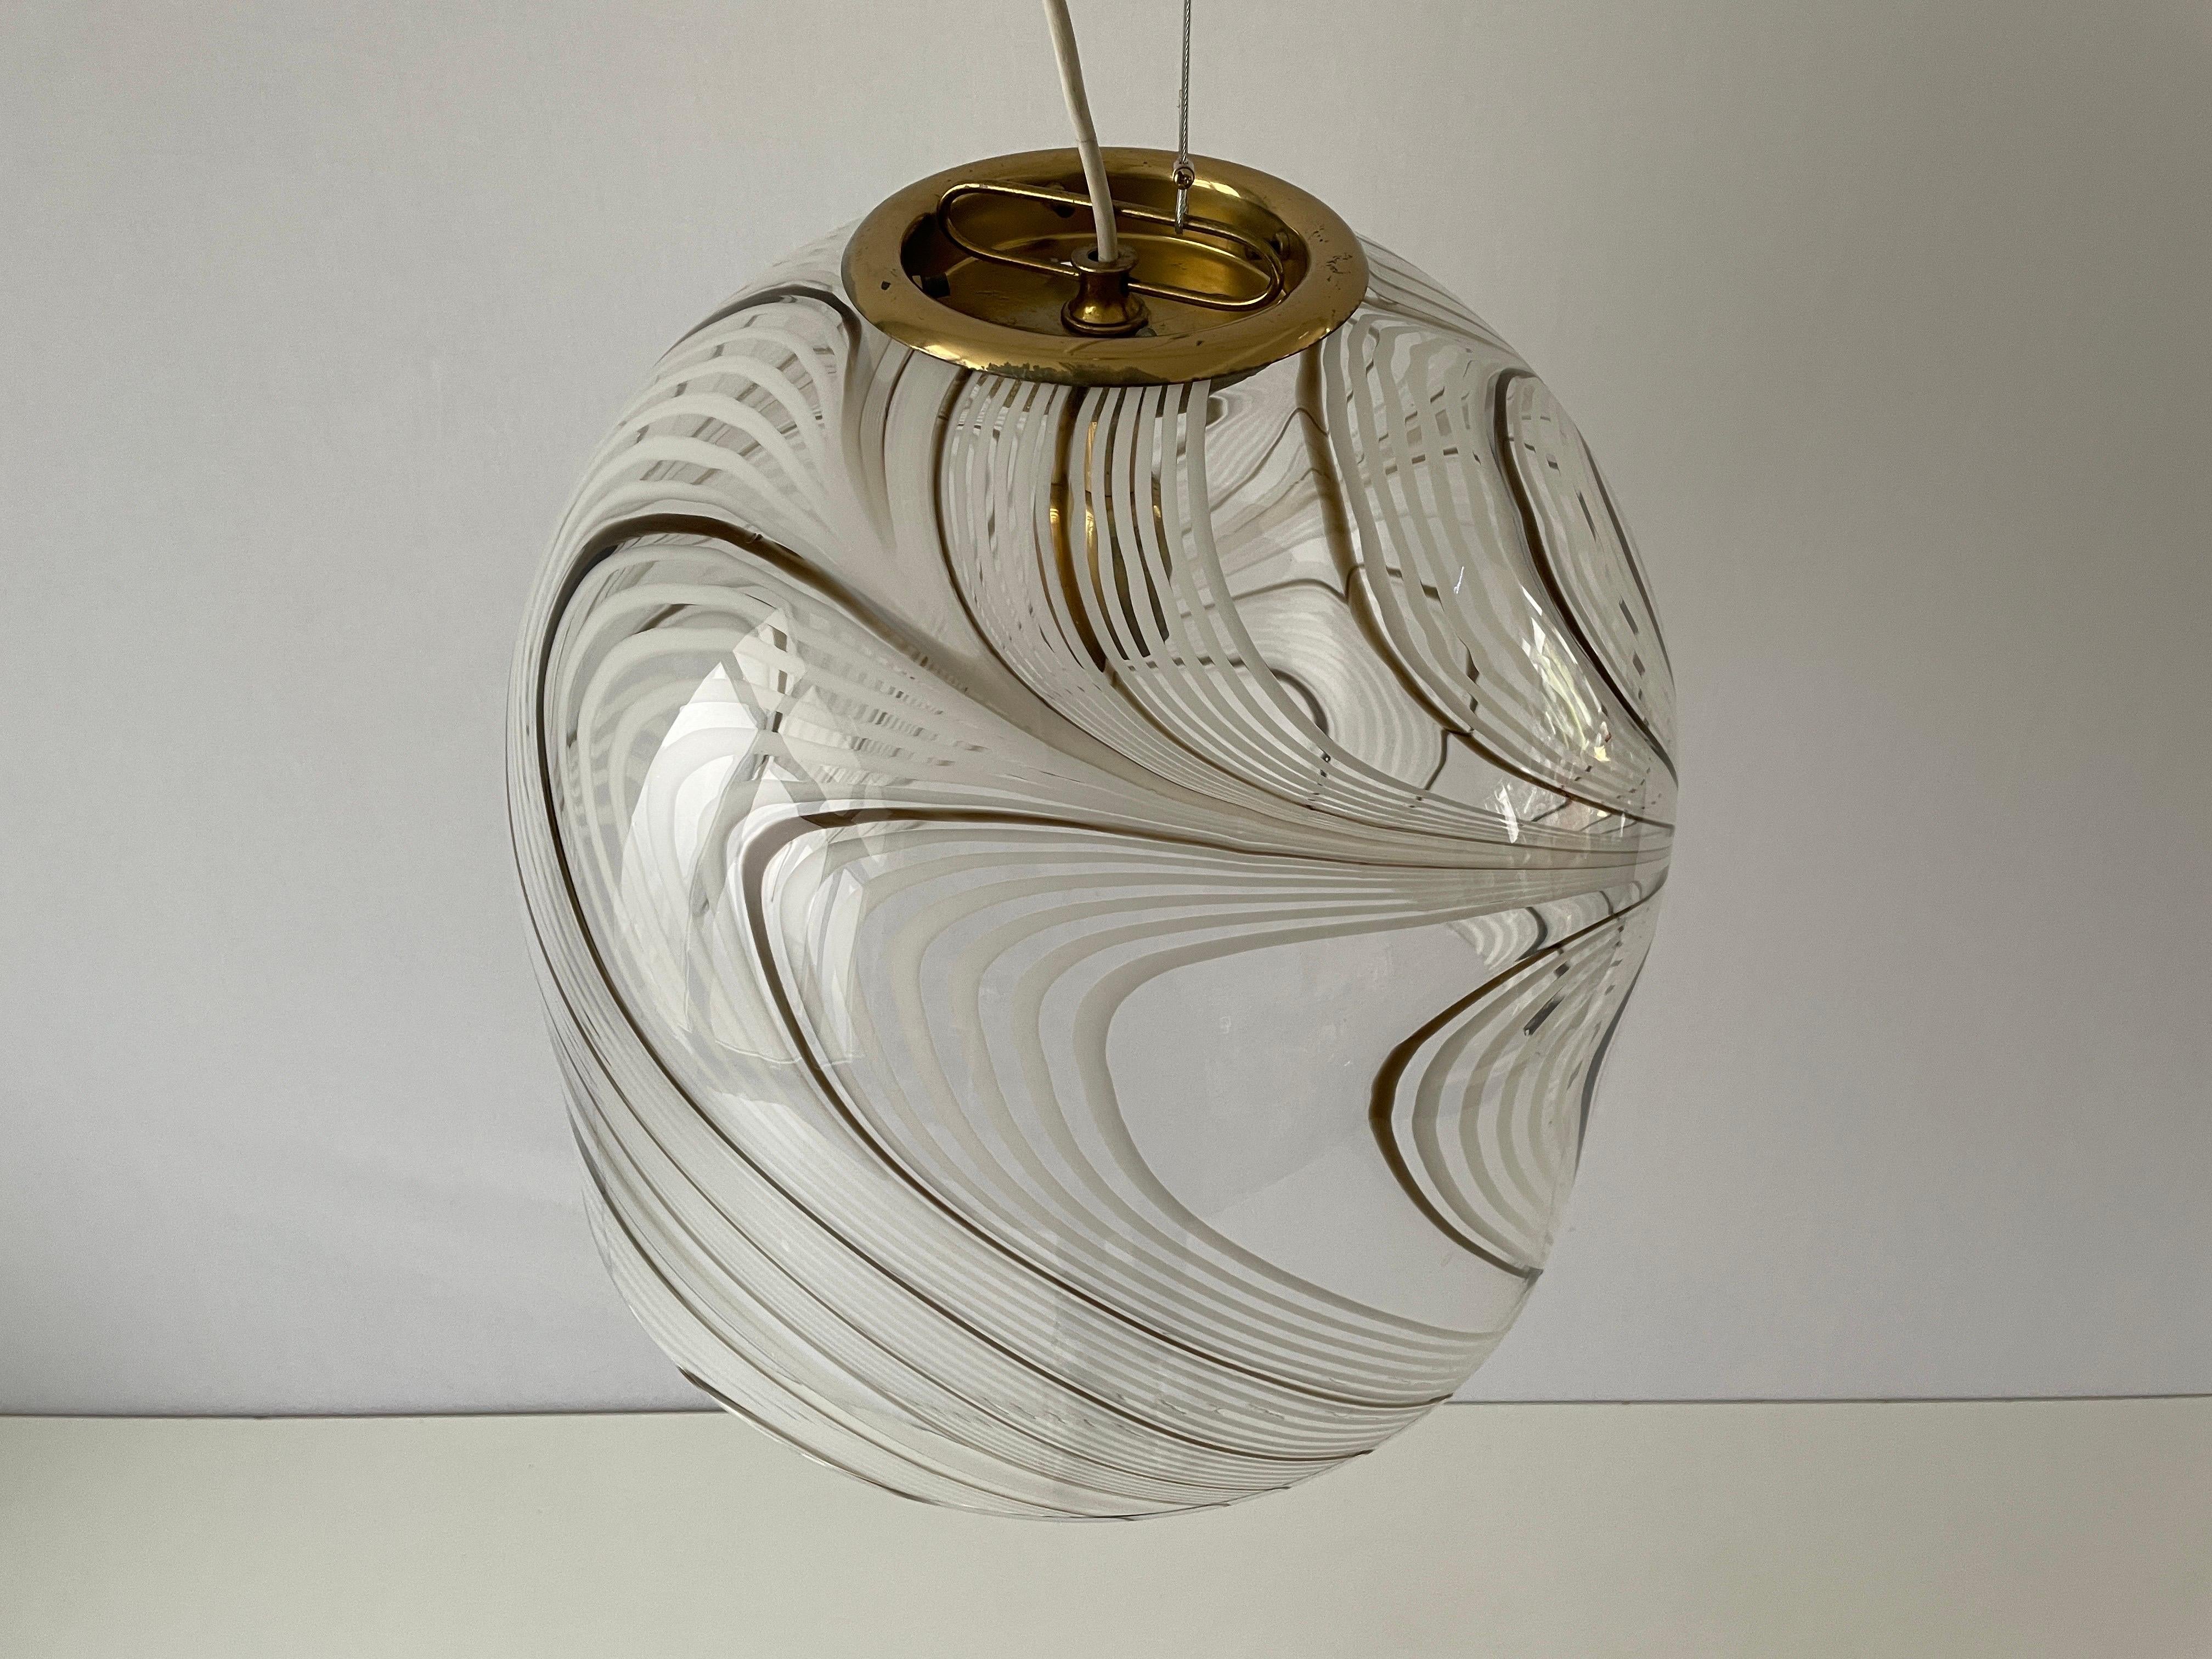 Swirl Design Murano Glass Pendant Lamp, 1970s, Italy

Sculptural very elegant rare design ceiling lamp

It is very ideal and suitable for all living areas.


Lamp is in good condition. No damage, no crack.
Wear consistent with age and use.

This